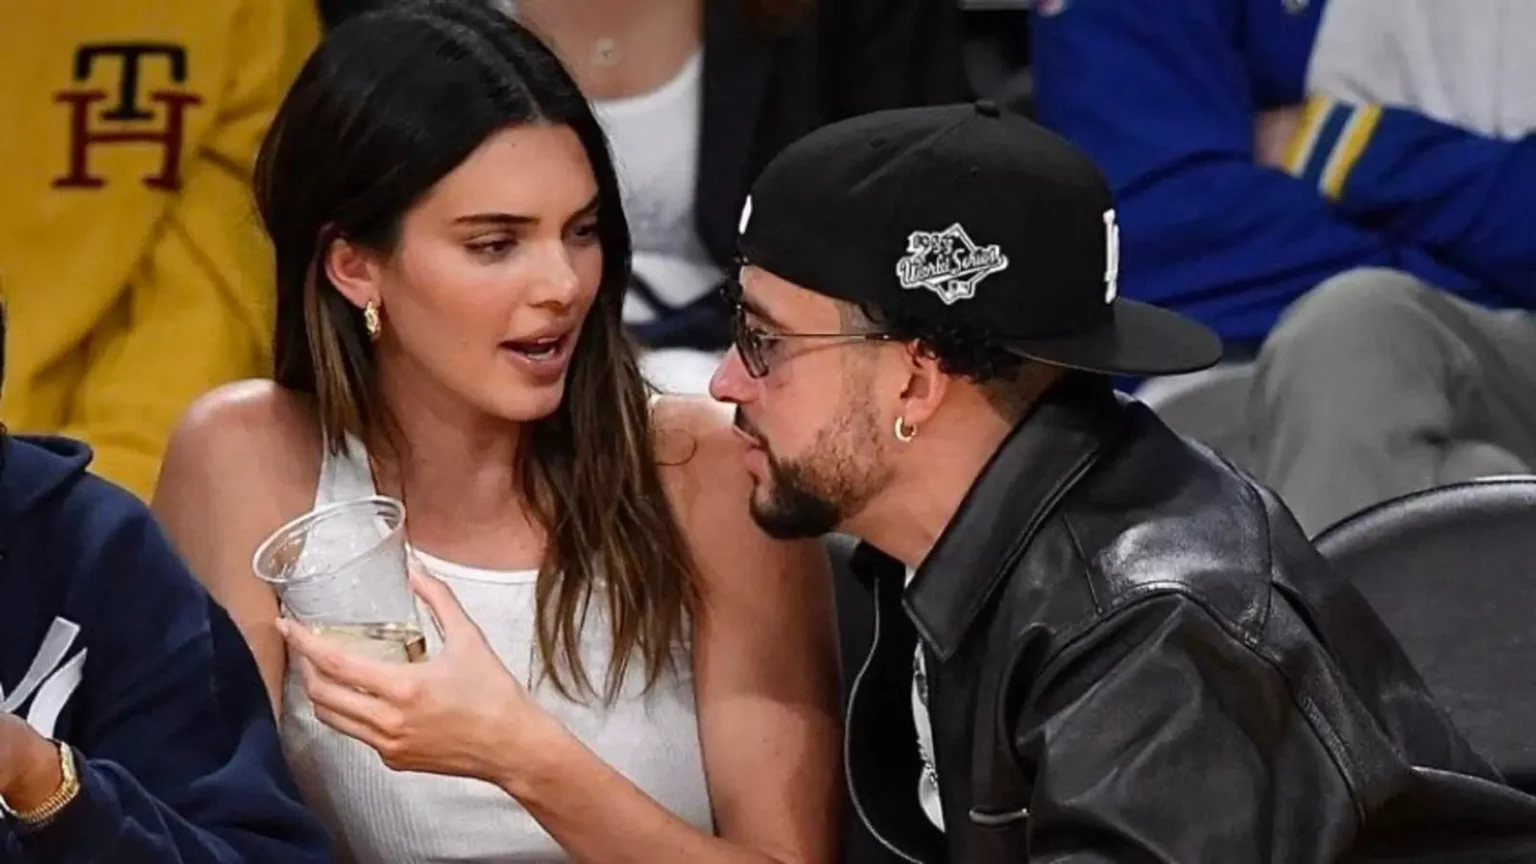 kendall-jenner-and-bad-bunny-relationship-getting-serious